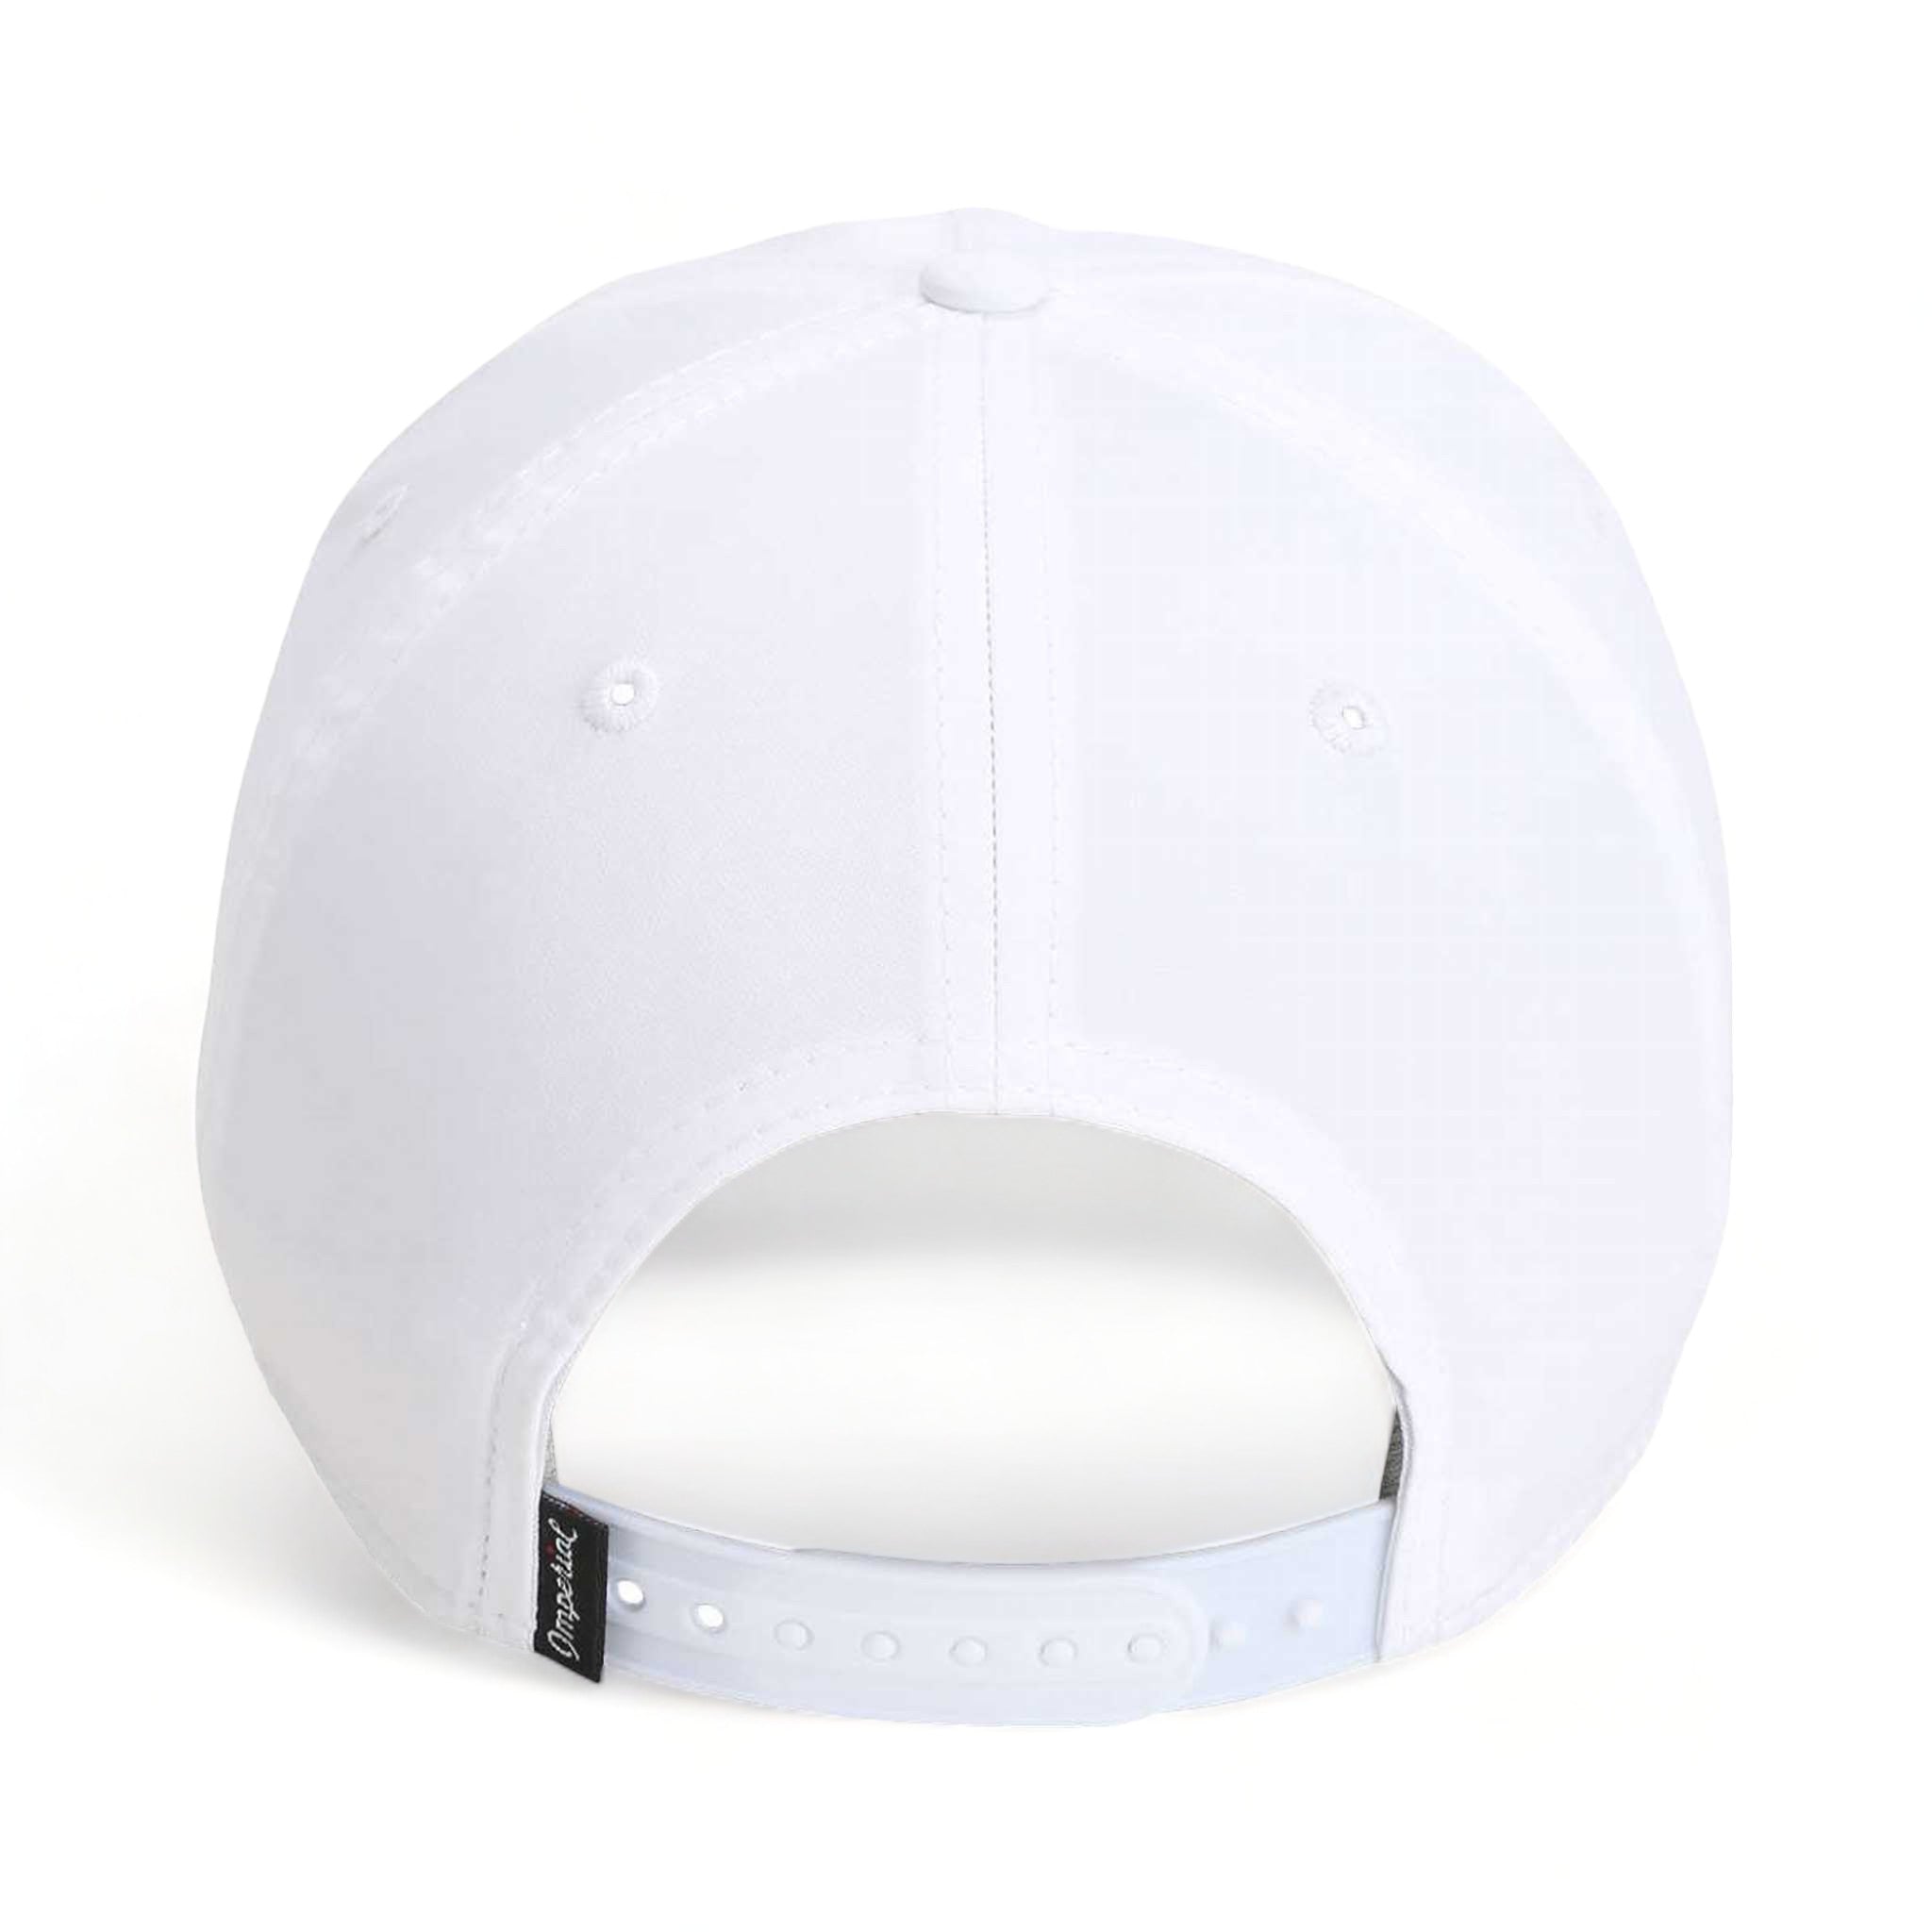 Back view of Imperial 5054 custom hat in white and metallic gold